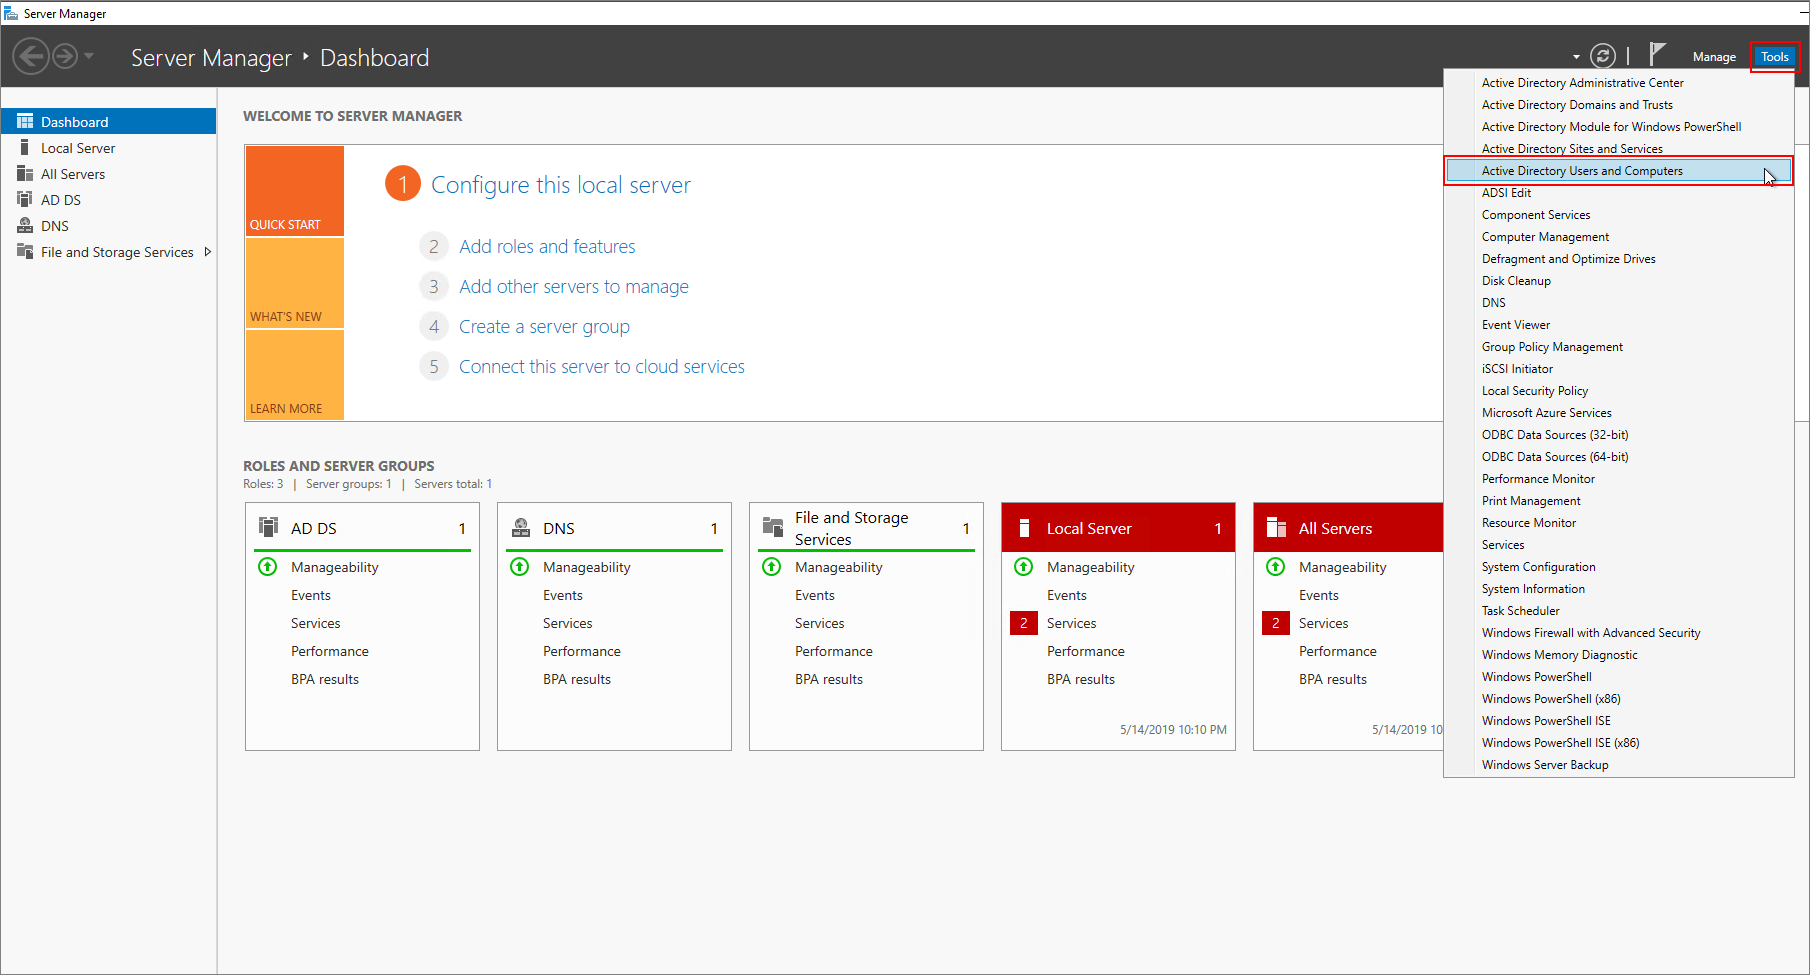 On the Server Manager dashboard, open Active Directory Management